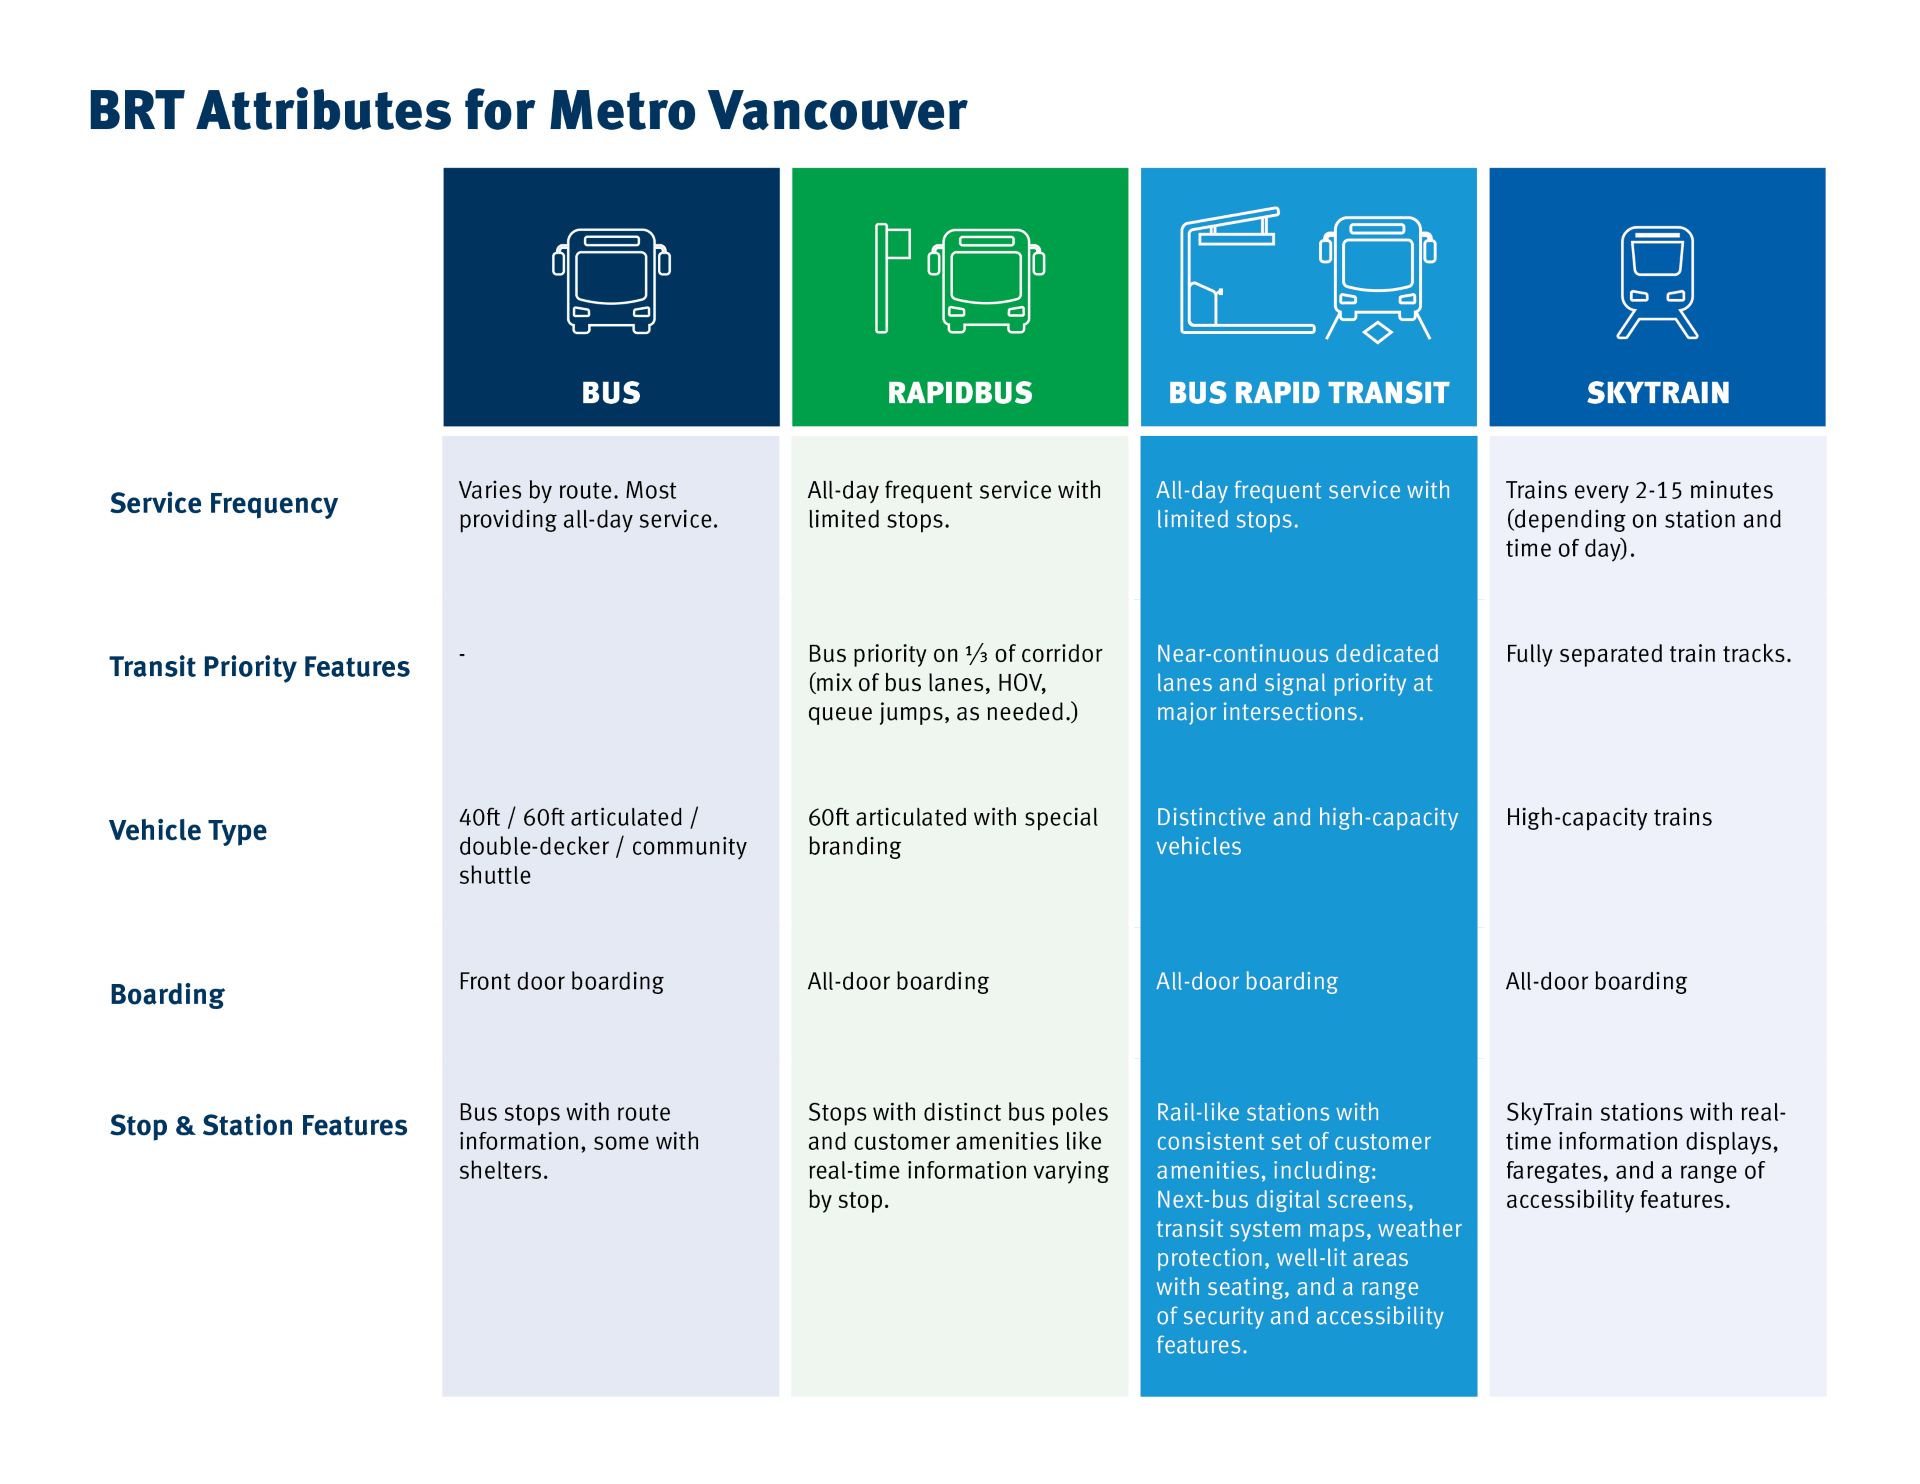 A table comparing bus, RapidBus, bus rapid transit and SkyTrain